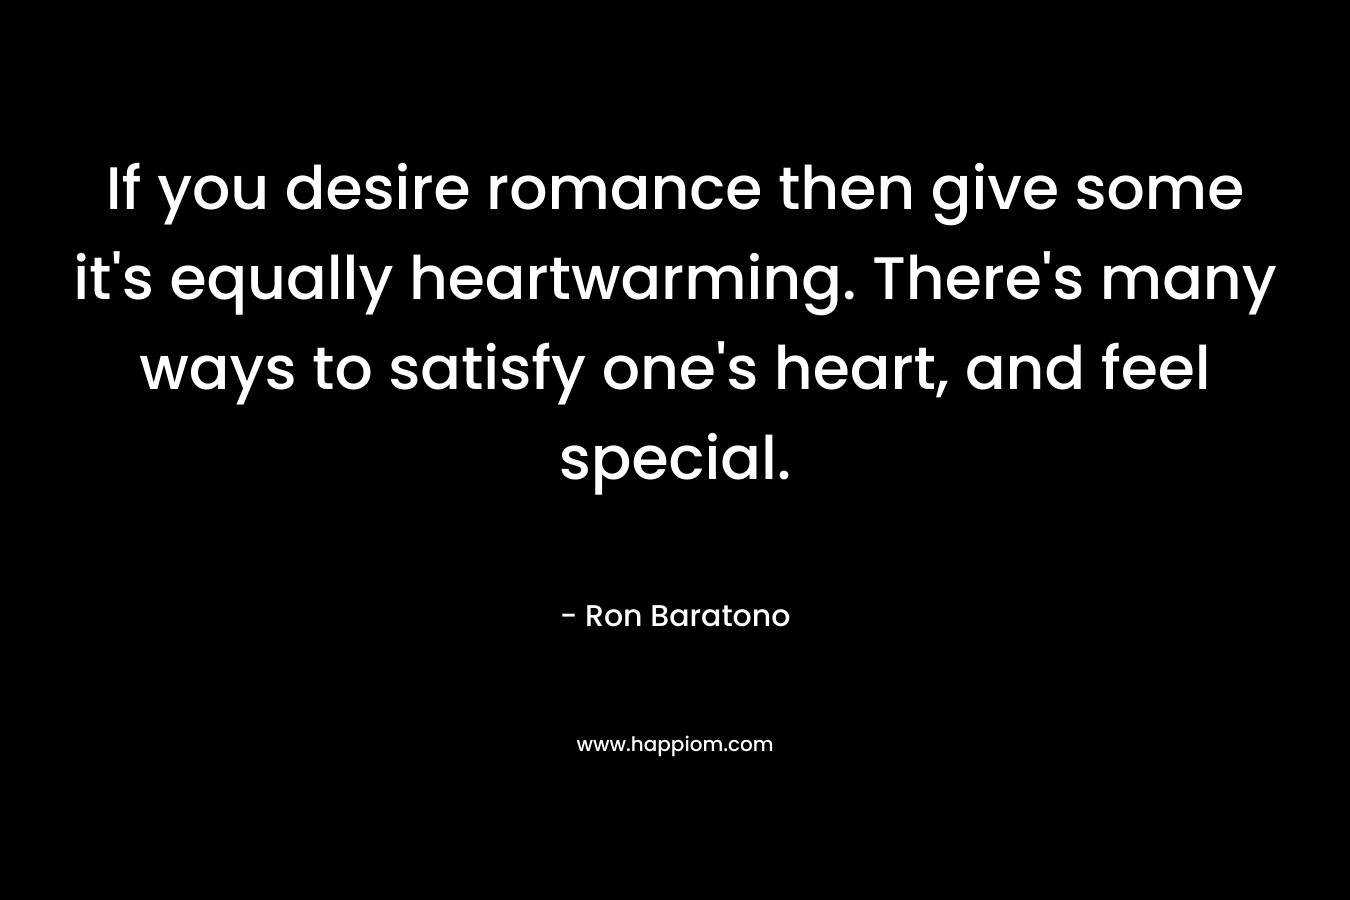 If you desire romance then give some it's equally heartwarming. There's many ways to satisfy one's heart, and feel special.